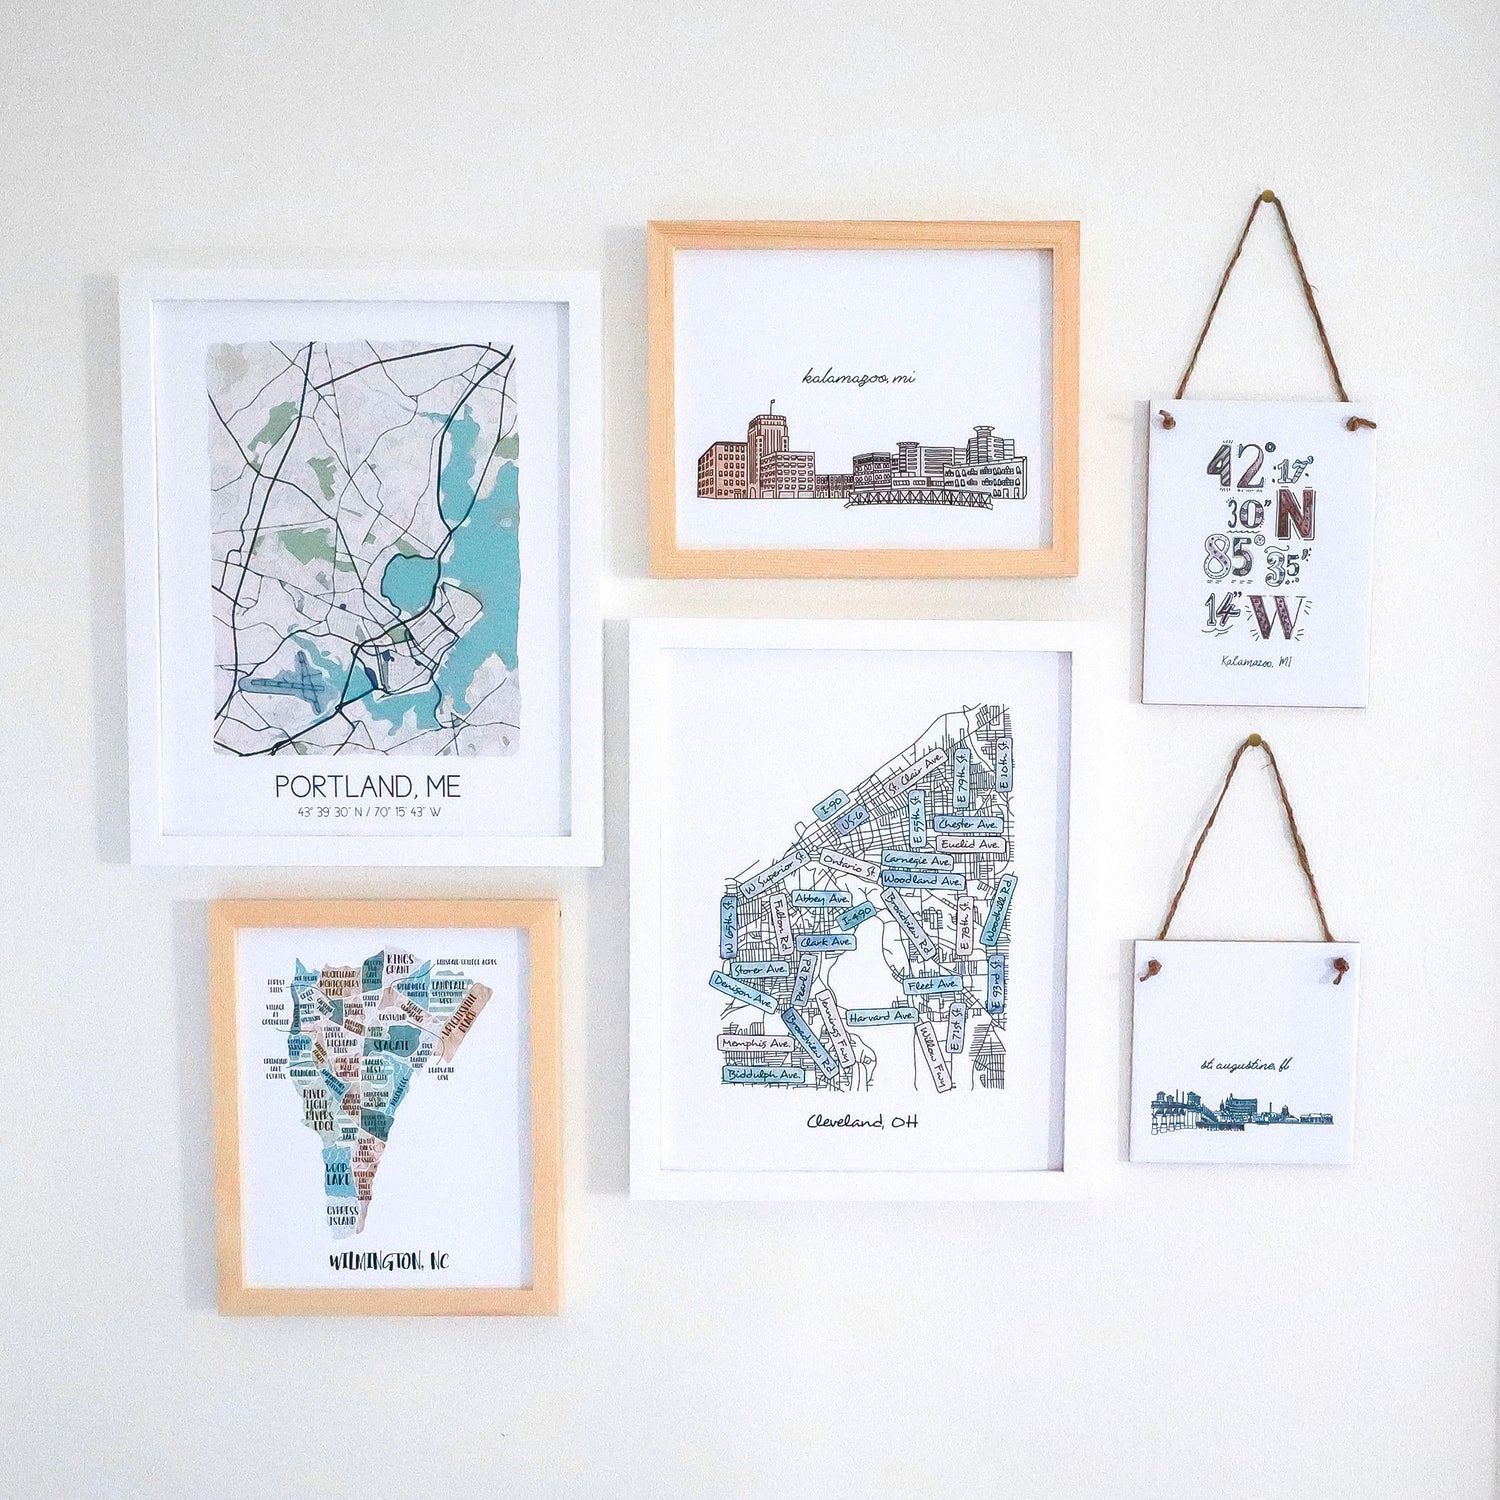 Gallery wall of city maps and street maps and hand drawn maps as prints and tile signs